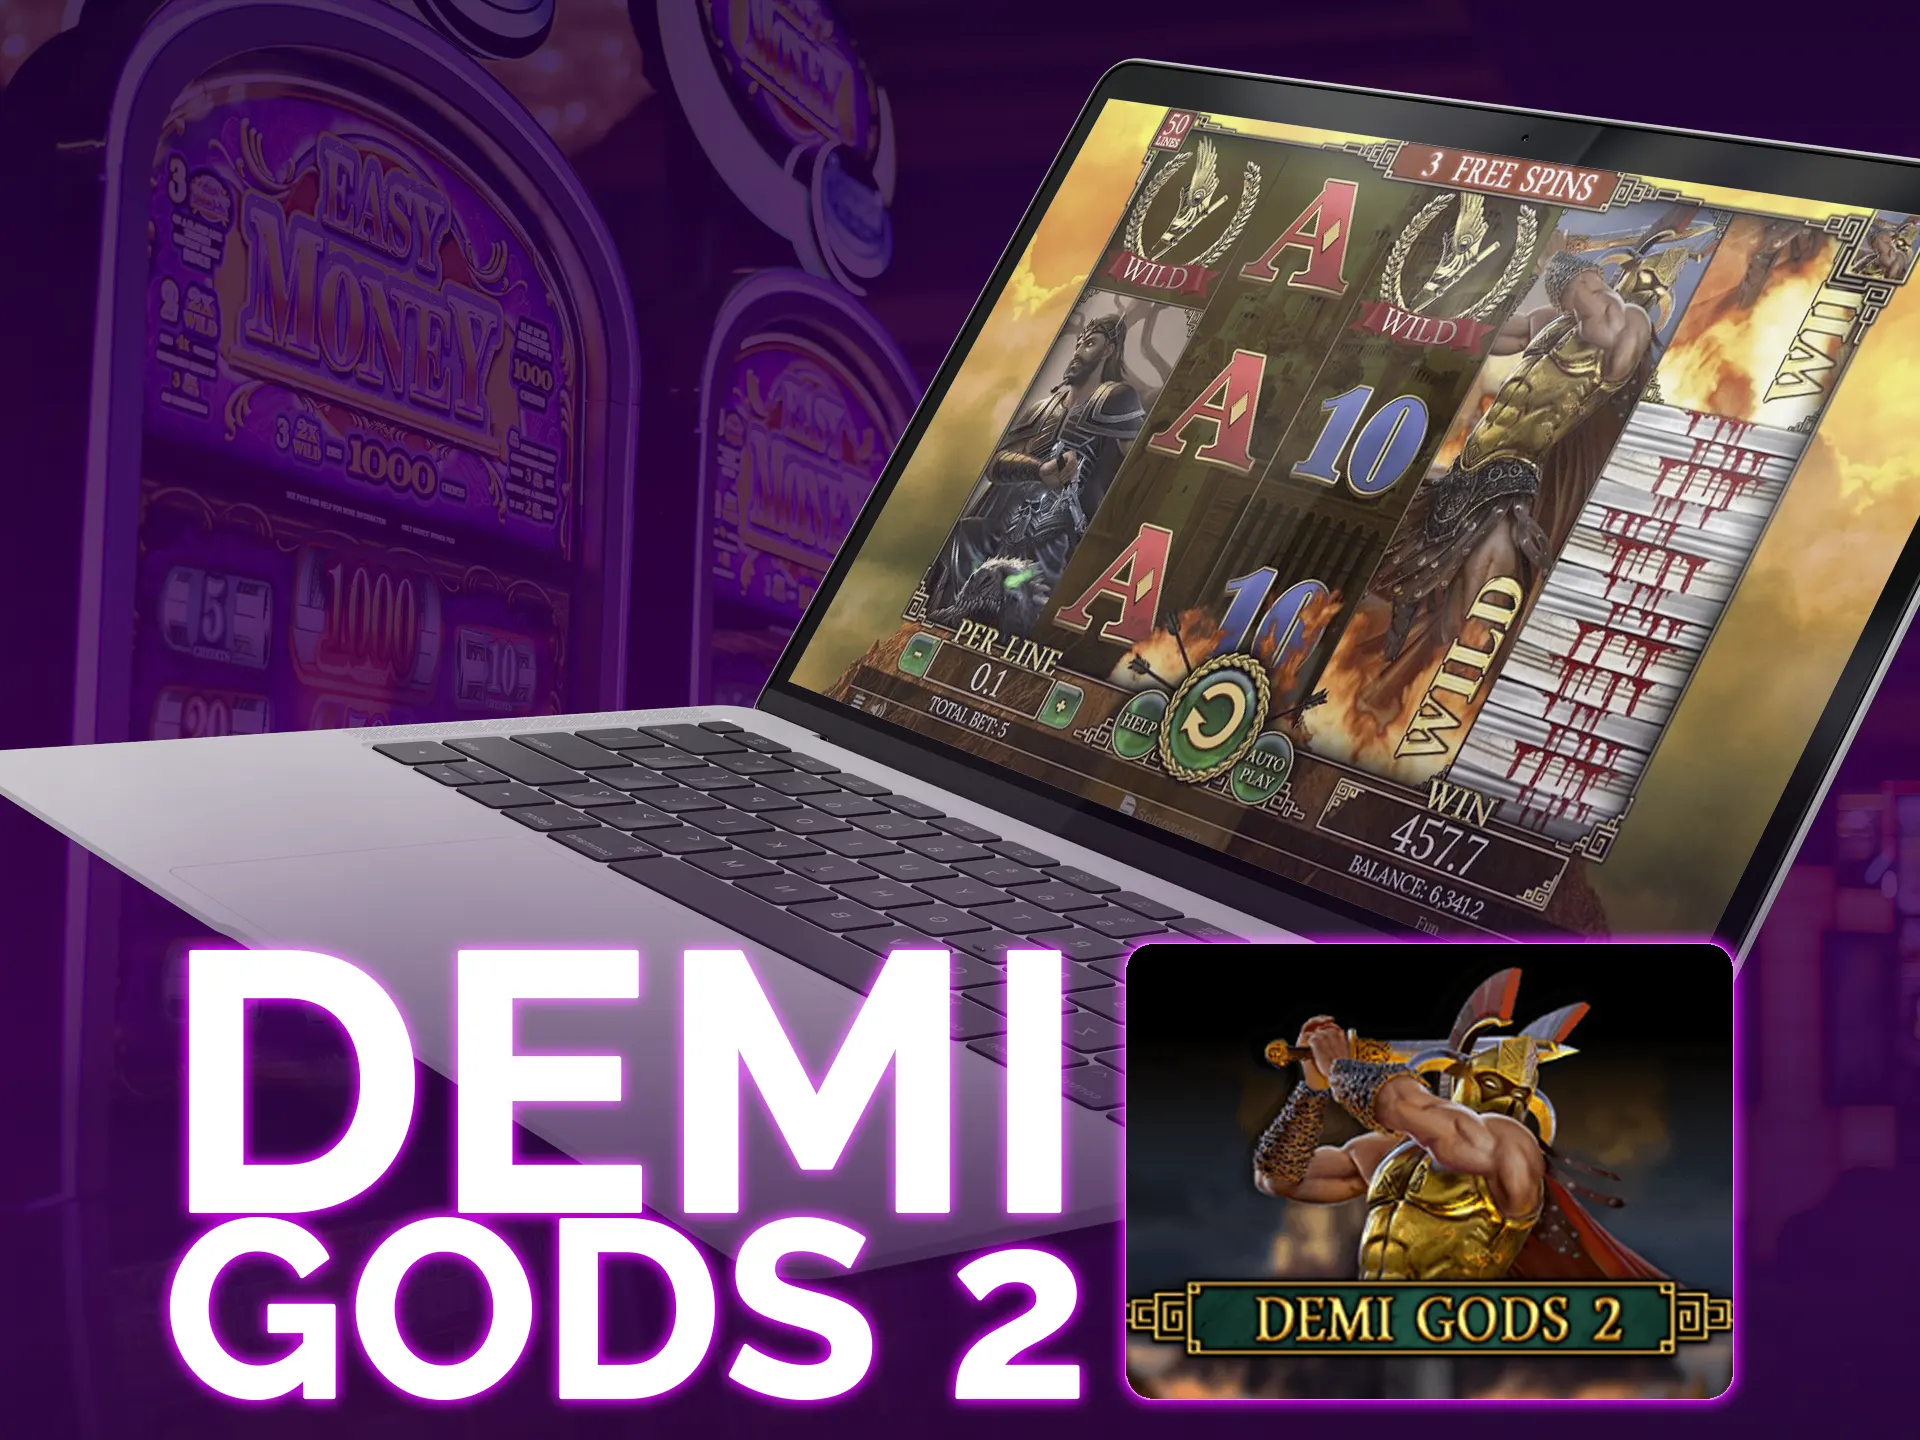 Demi Gods 2 it`s an ancient Rome-themed slot: 97% RTP, low volatility, x500 max winnings, free spins.